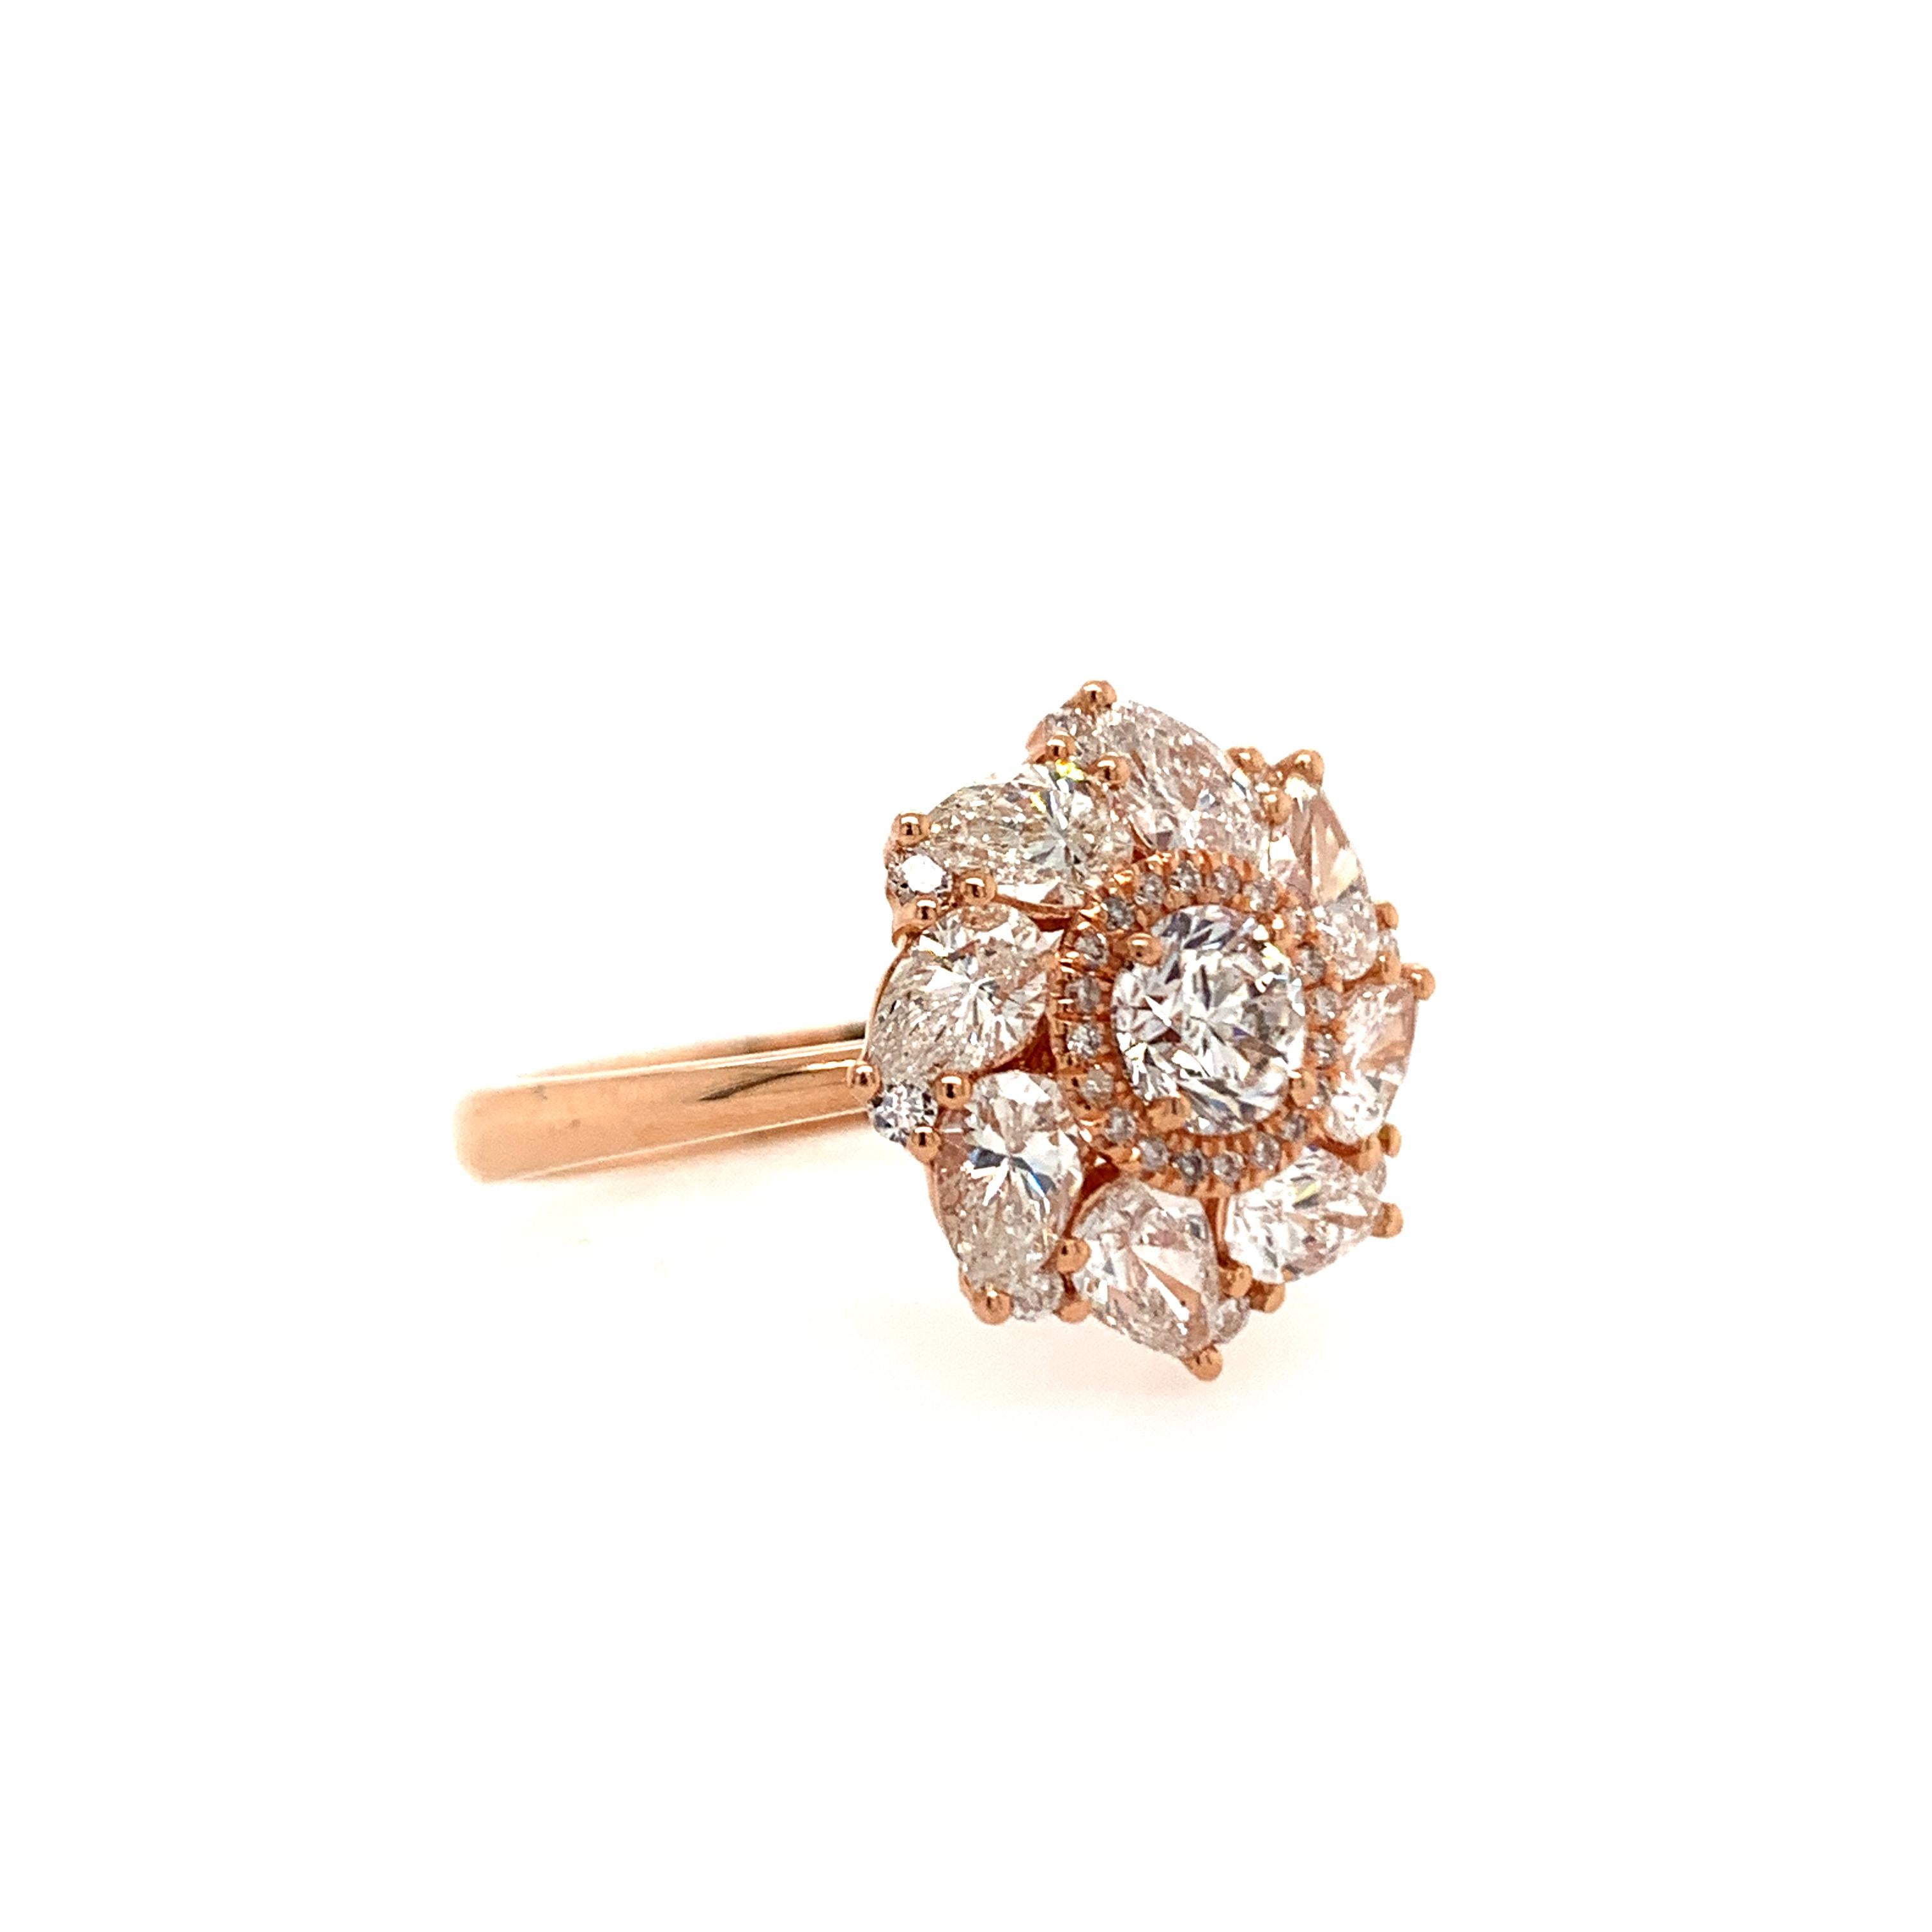 This beautiful ring flaunts a 0.70 carat round natural white diamond surrounded by a diamond halo and set atop a bed of round and pear-shaped diamonds.

Set in 14K rose gold.

Center stone: Natural white diamond - 0.70 carat, color G, clarity SI1